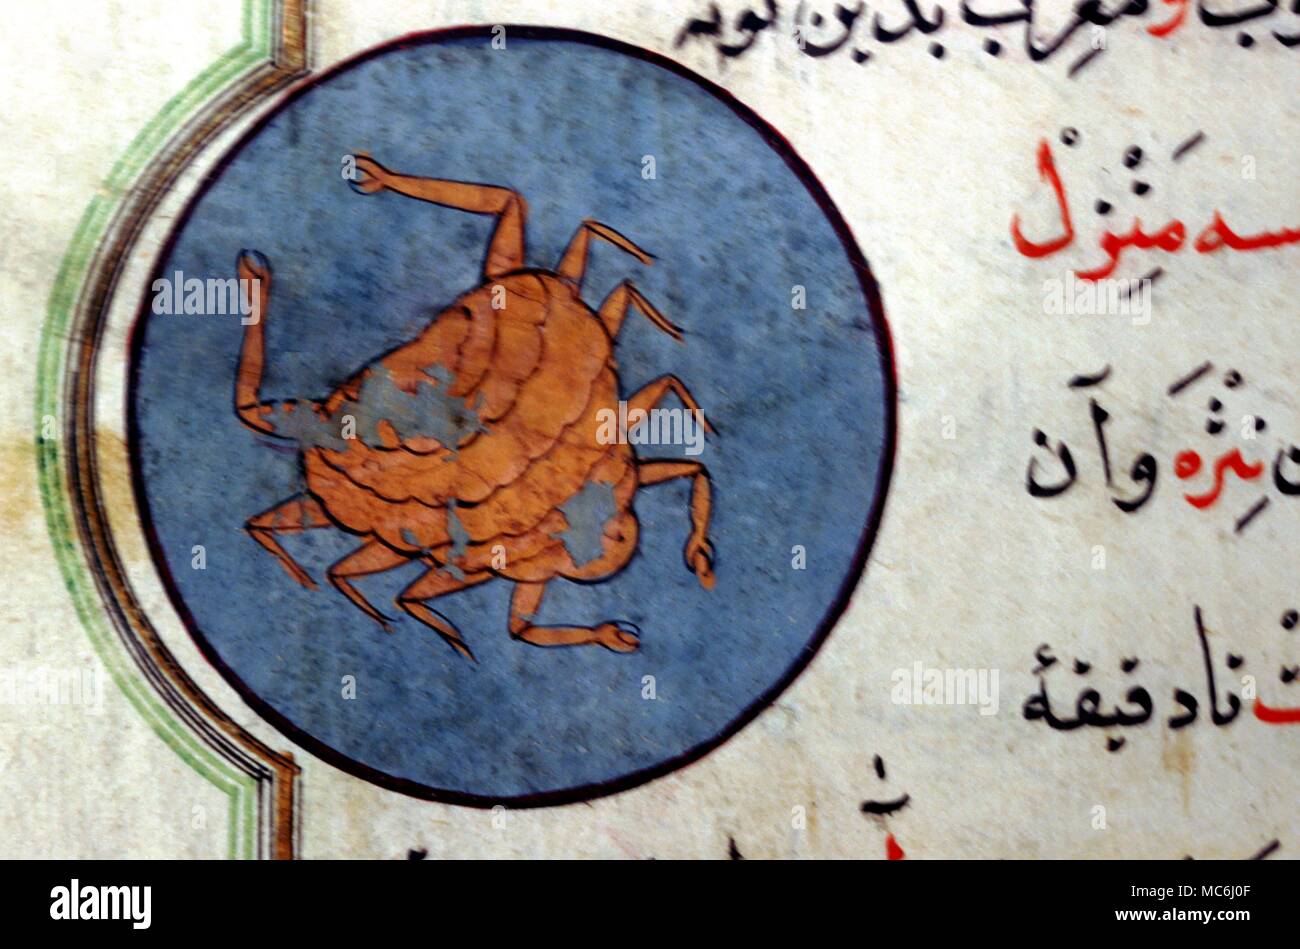 Astrology Zodiac Signs Cancer the Crab from a 17th century Arabic manuscript in the Tareq Rajeb Museum Kuwait Stock Photo